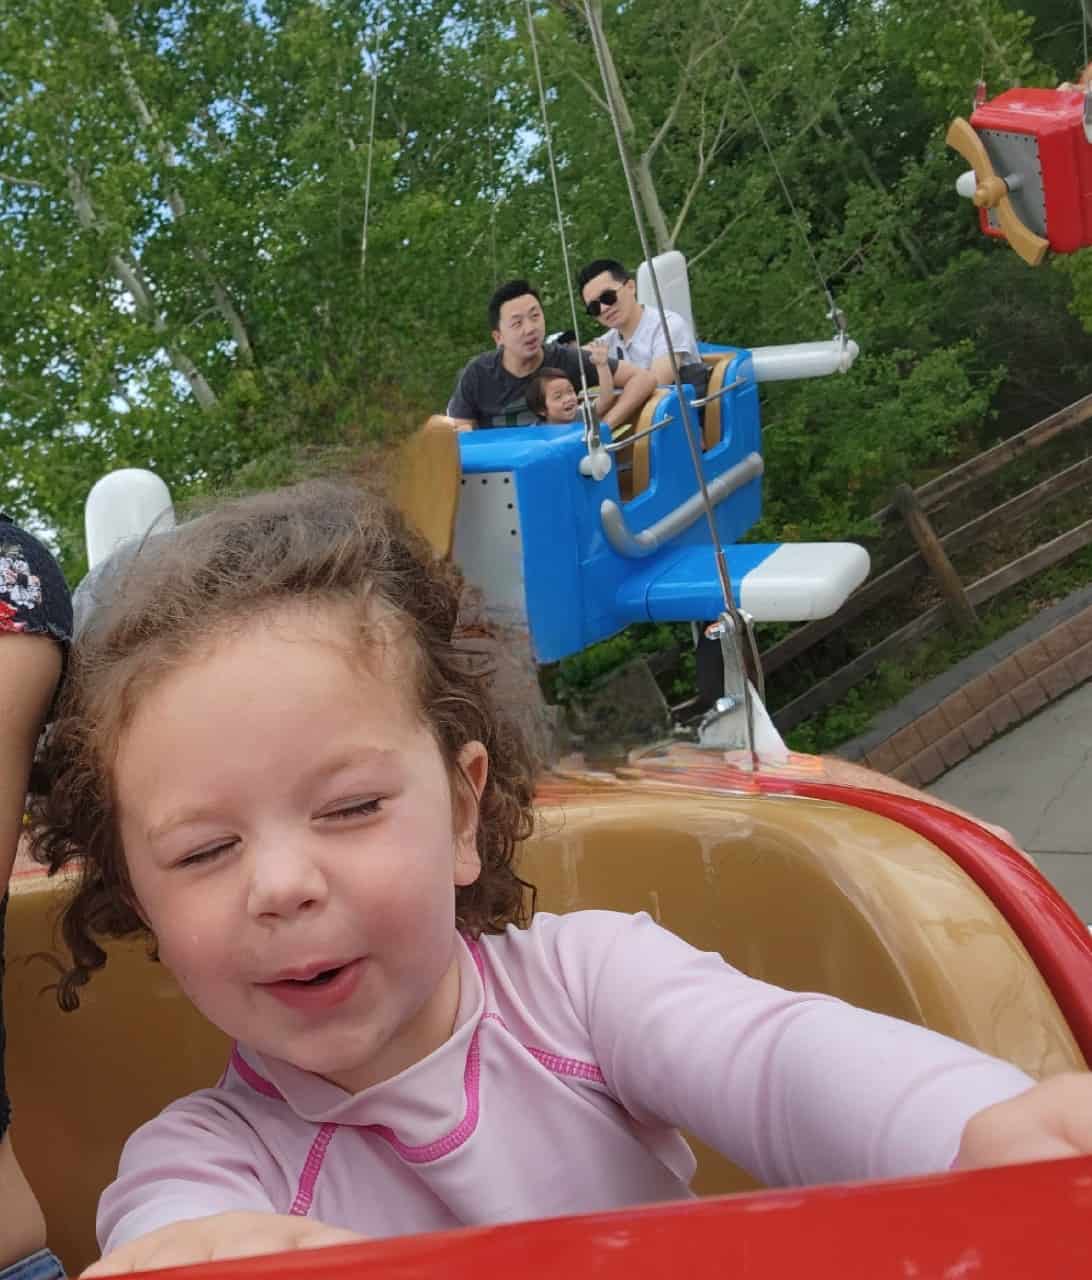 "Weeeeeeee" Kids Love Calaway Park - Flying high in the sky on the kids airplane ride at Calaway Park! I think you can tell by this face that it's a good time.